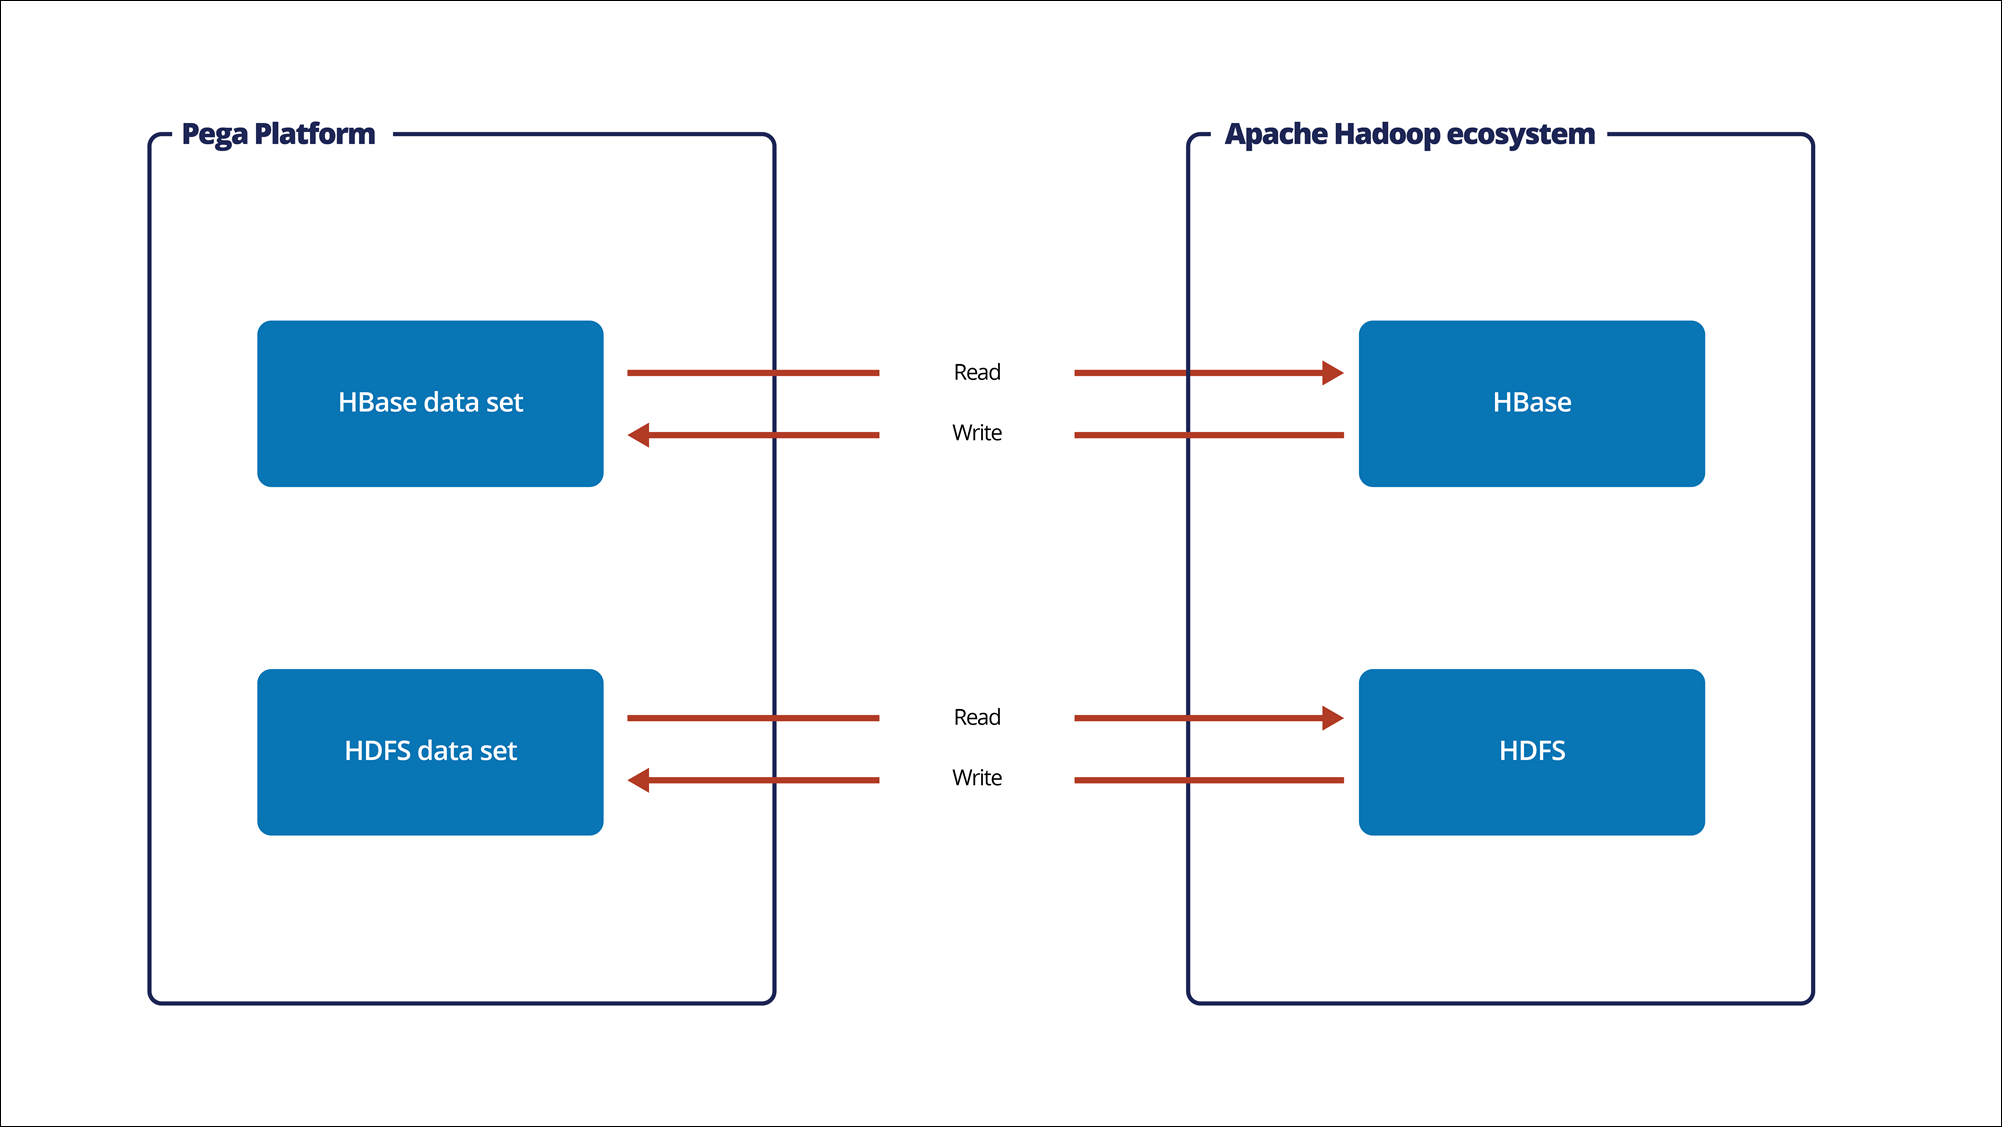 "HBase and HDFS data sets connections to an Apache Hadoop ecosystem"